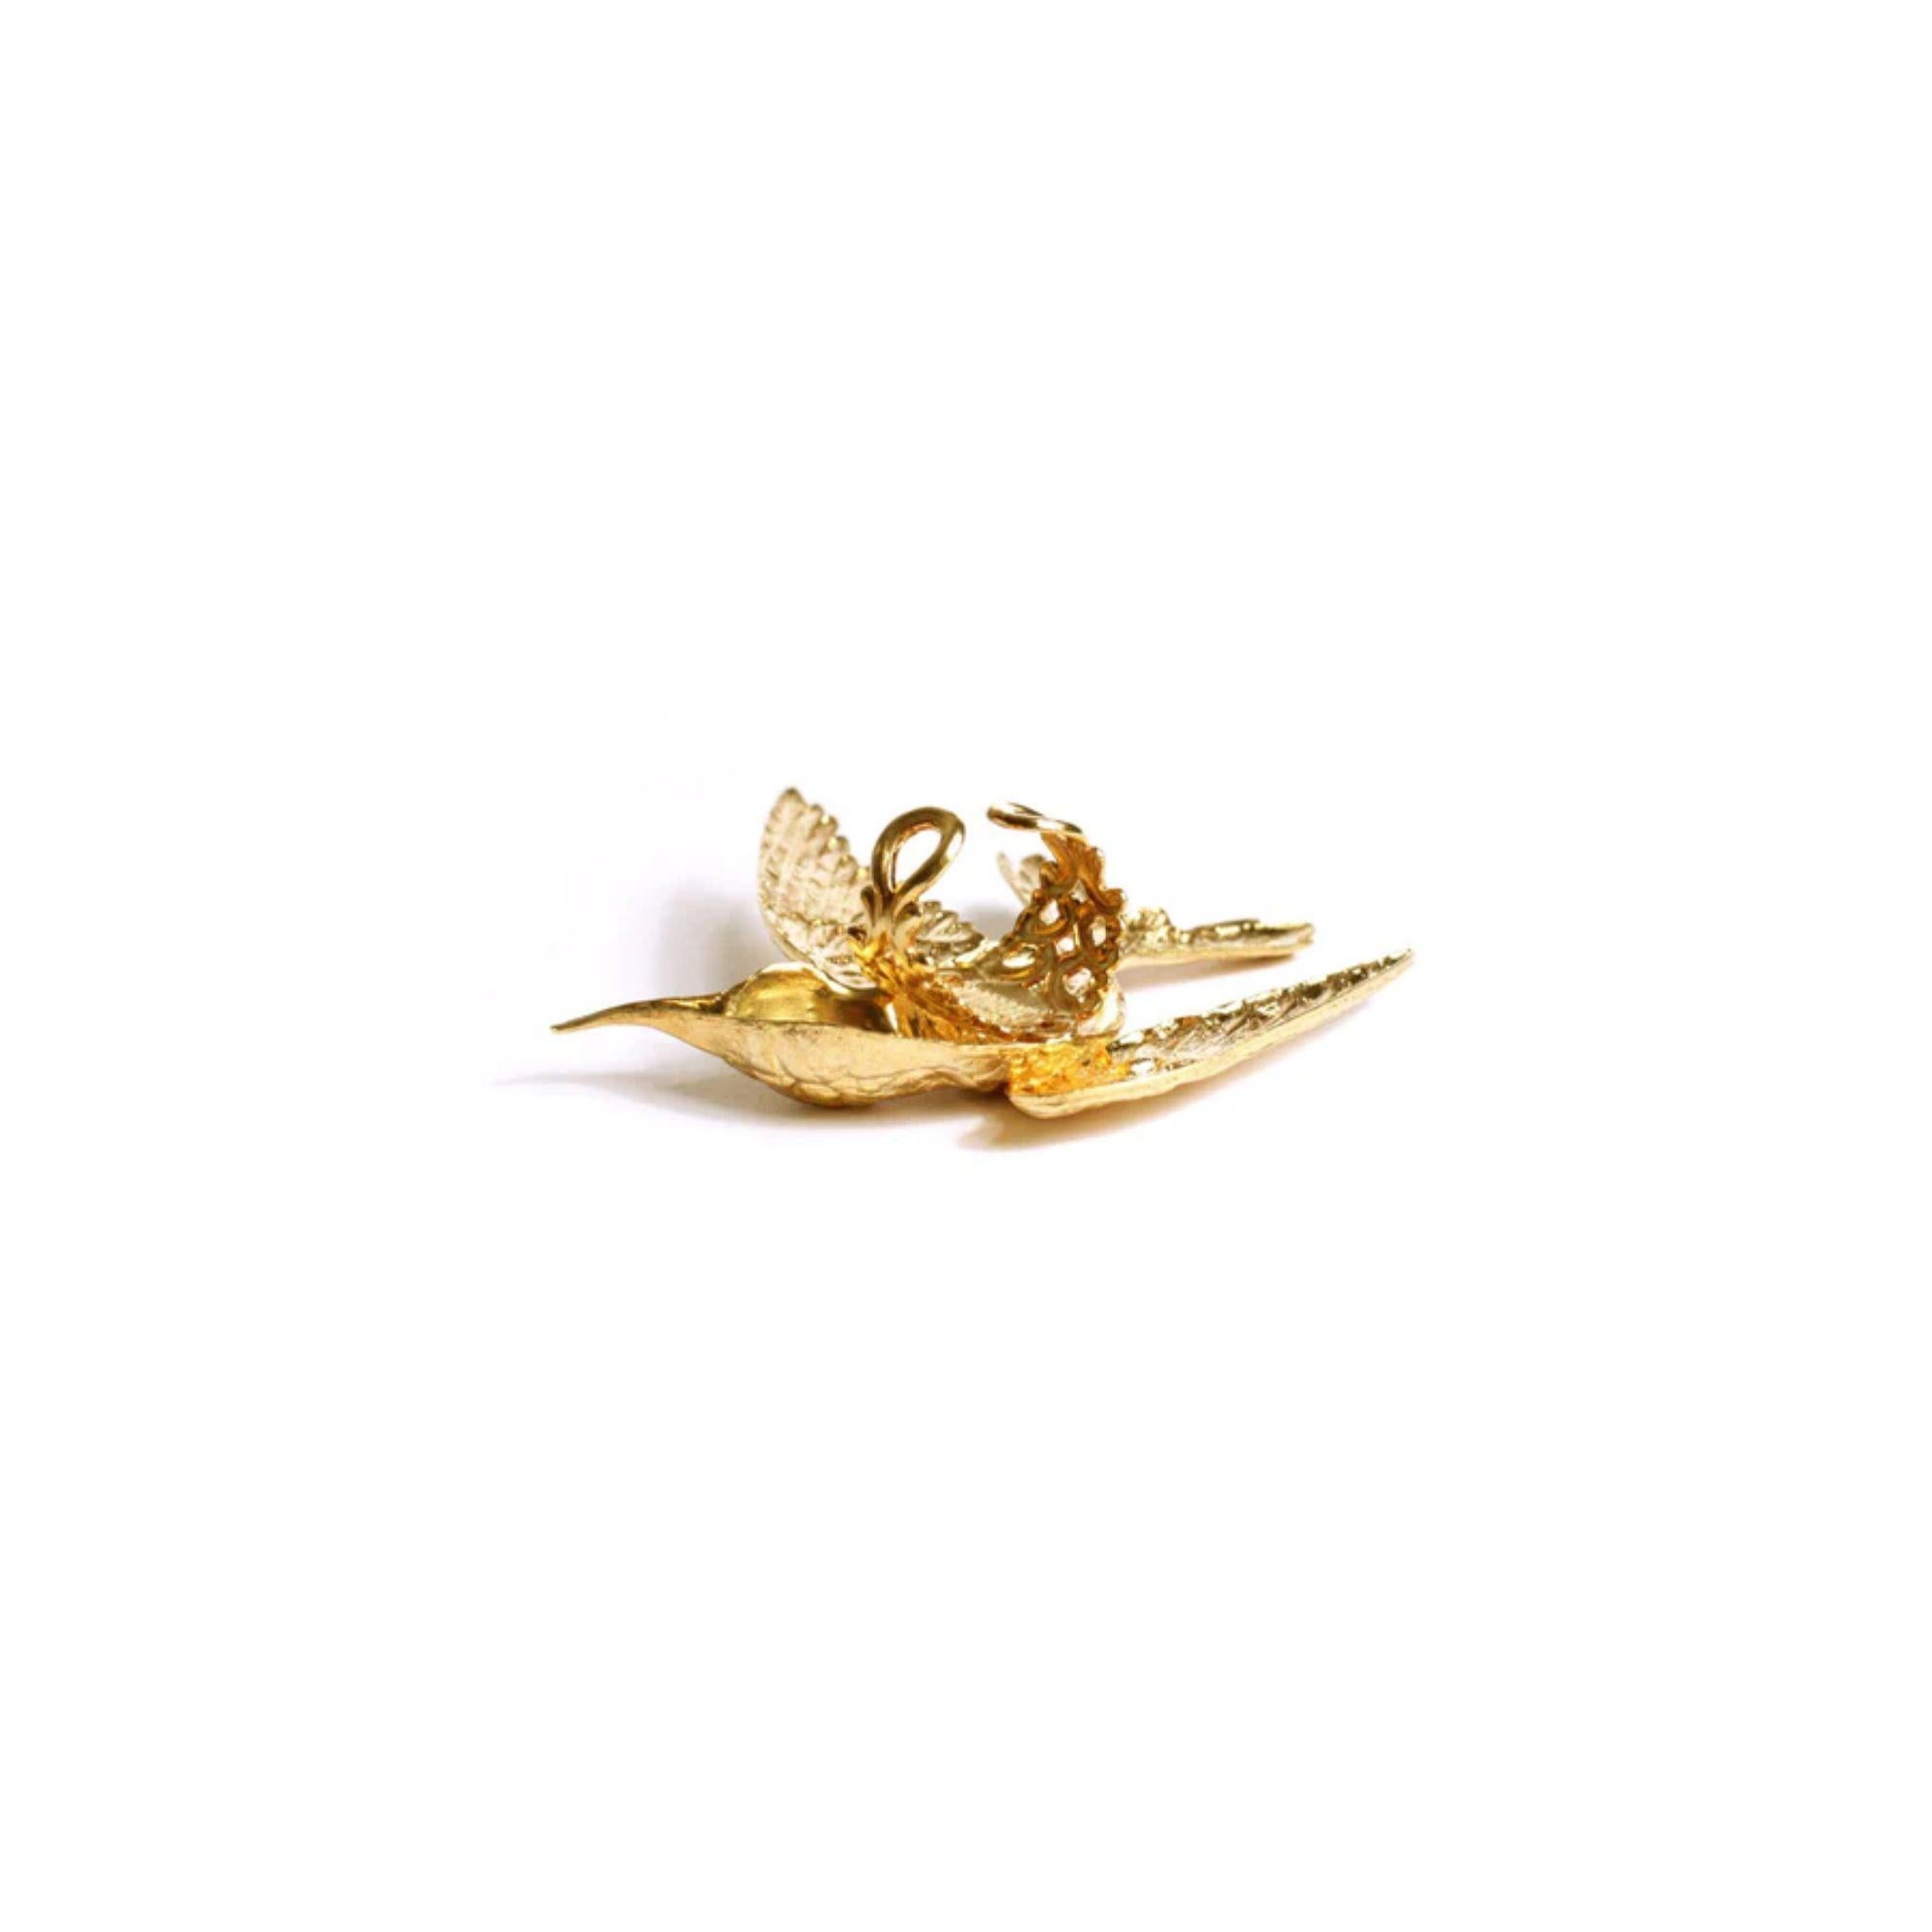 Stunning hummingbird ring with moving wing! It’s a unique cocktail size ring to capture everyone’s attention and lift your spirits. Made in America. 24k yellow gold plated on brass.

The hummingbird generally symbolizes joy and playfulness, as well